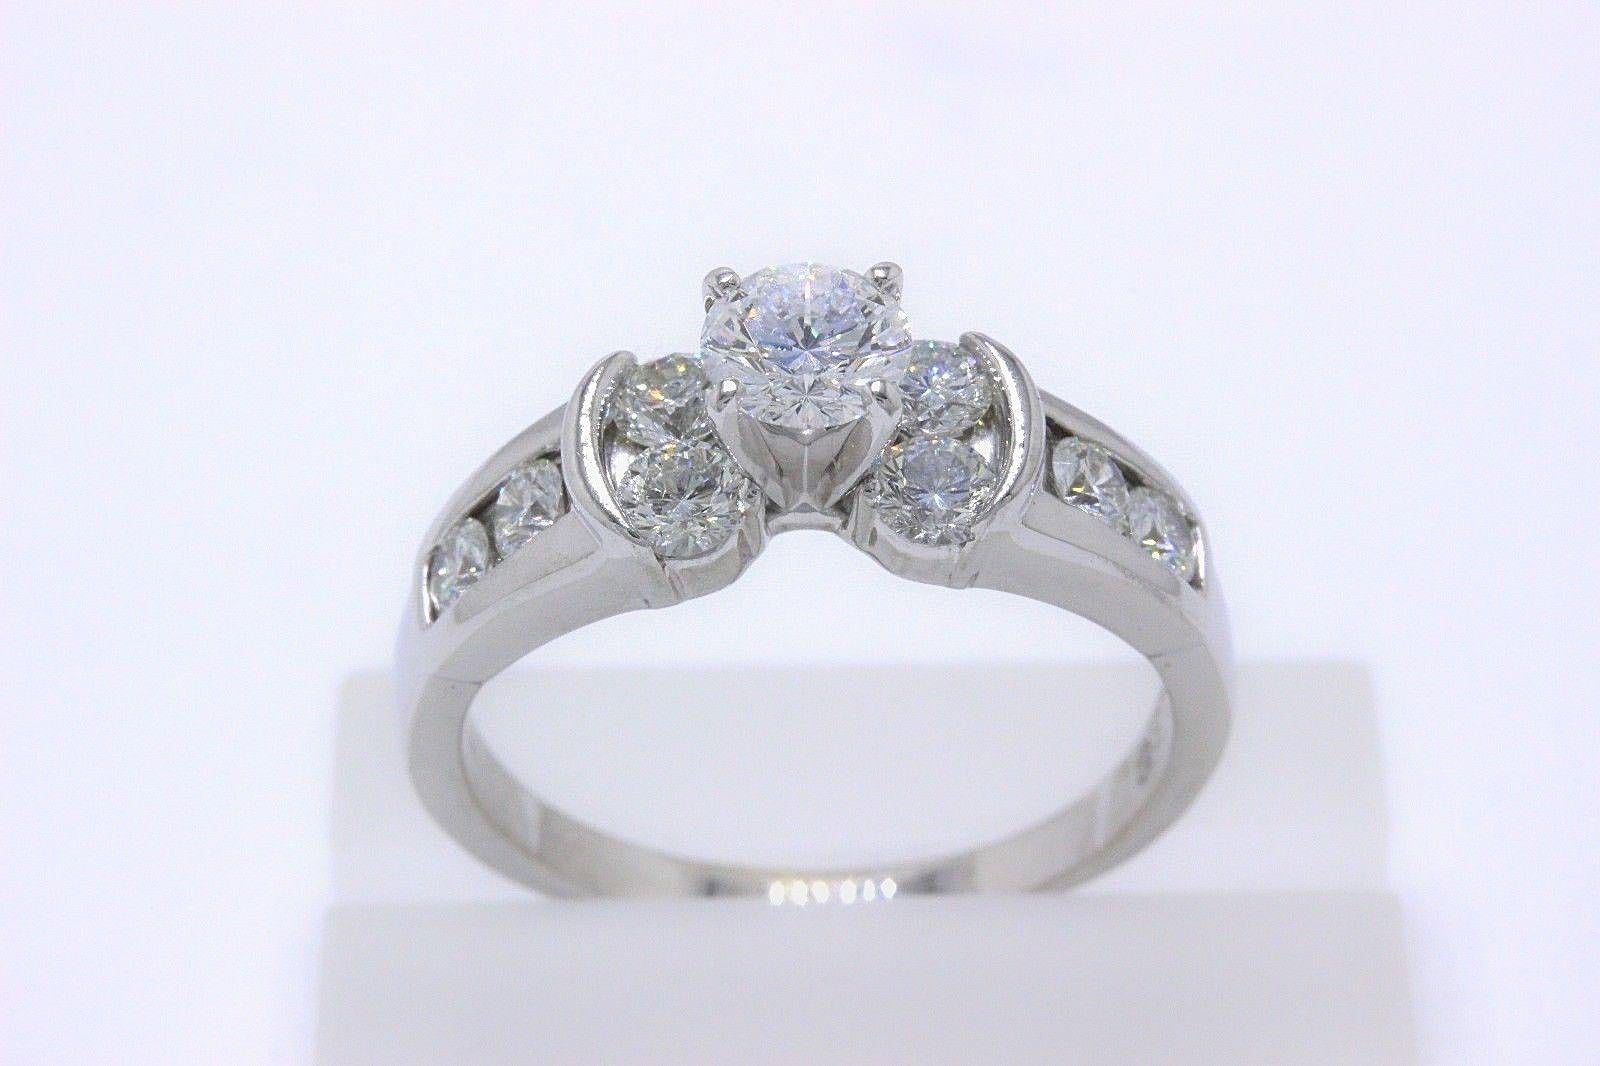 Leo Diamond Engagement Ring Round Cut 1.82 Carat 14 Karat White Gold In Excellent Condition For Sale In San Diego, CA